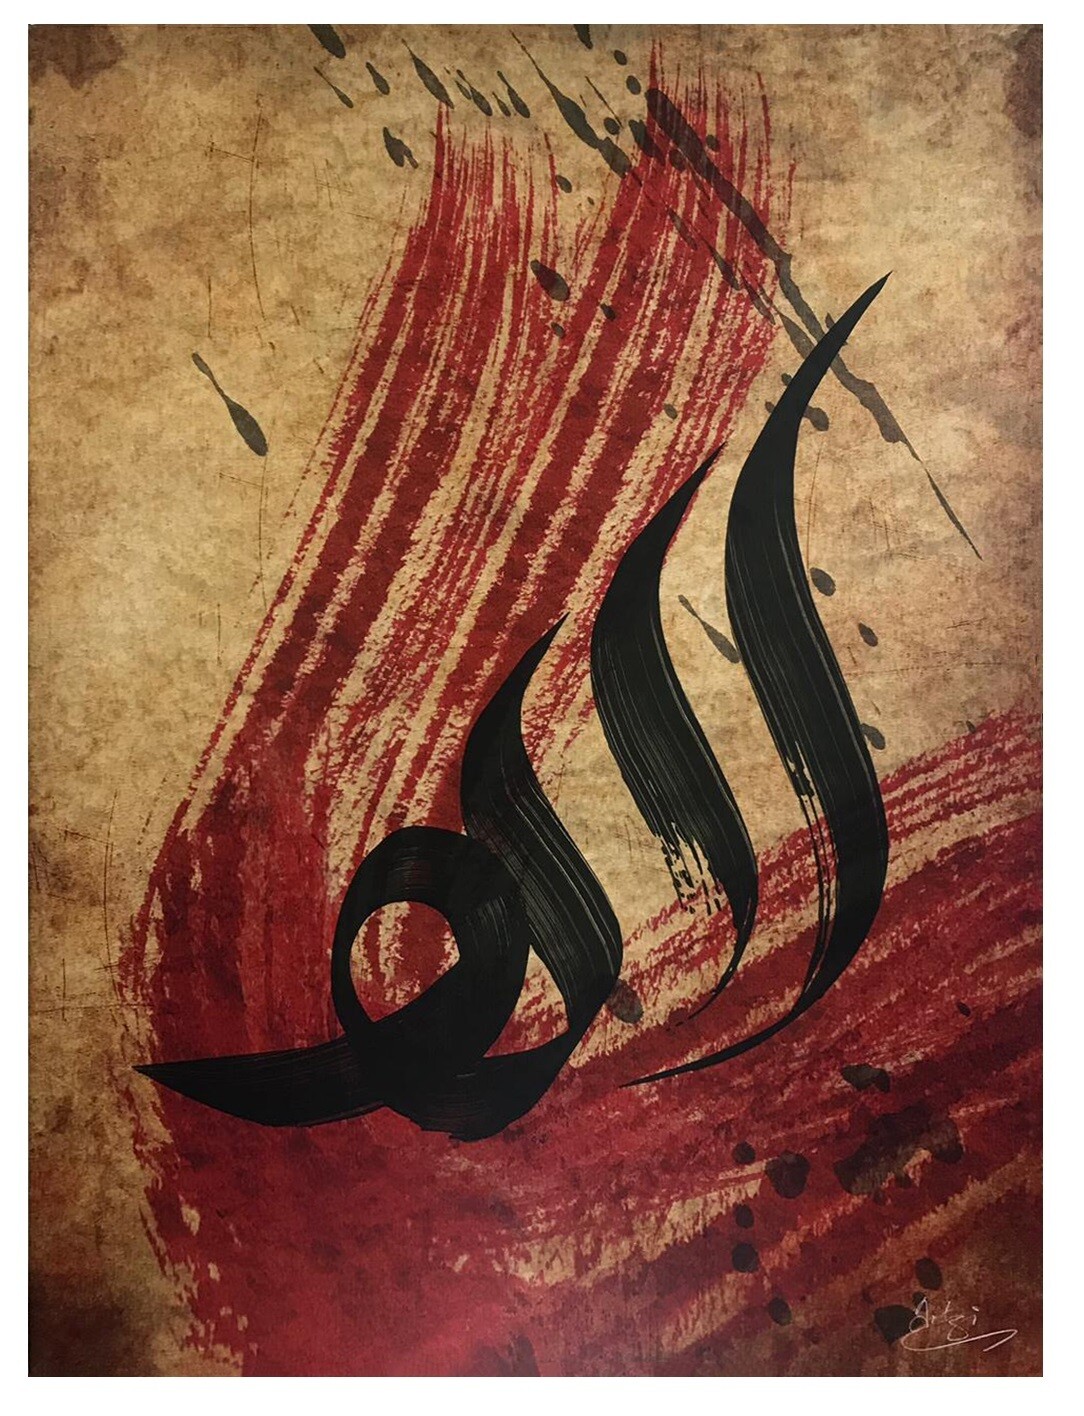 Allah Black Stylistic Calligraphy Red Brush strokes on antiqued Tan Original Giclée Canvas